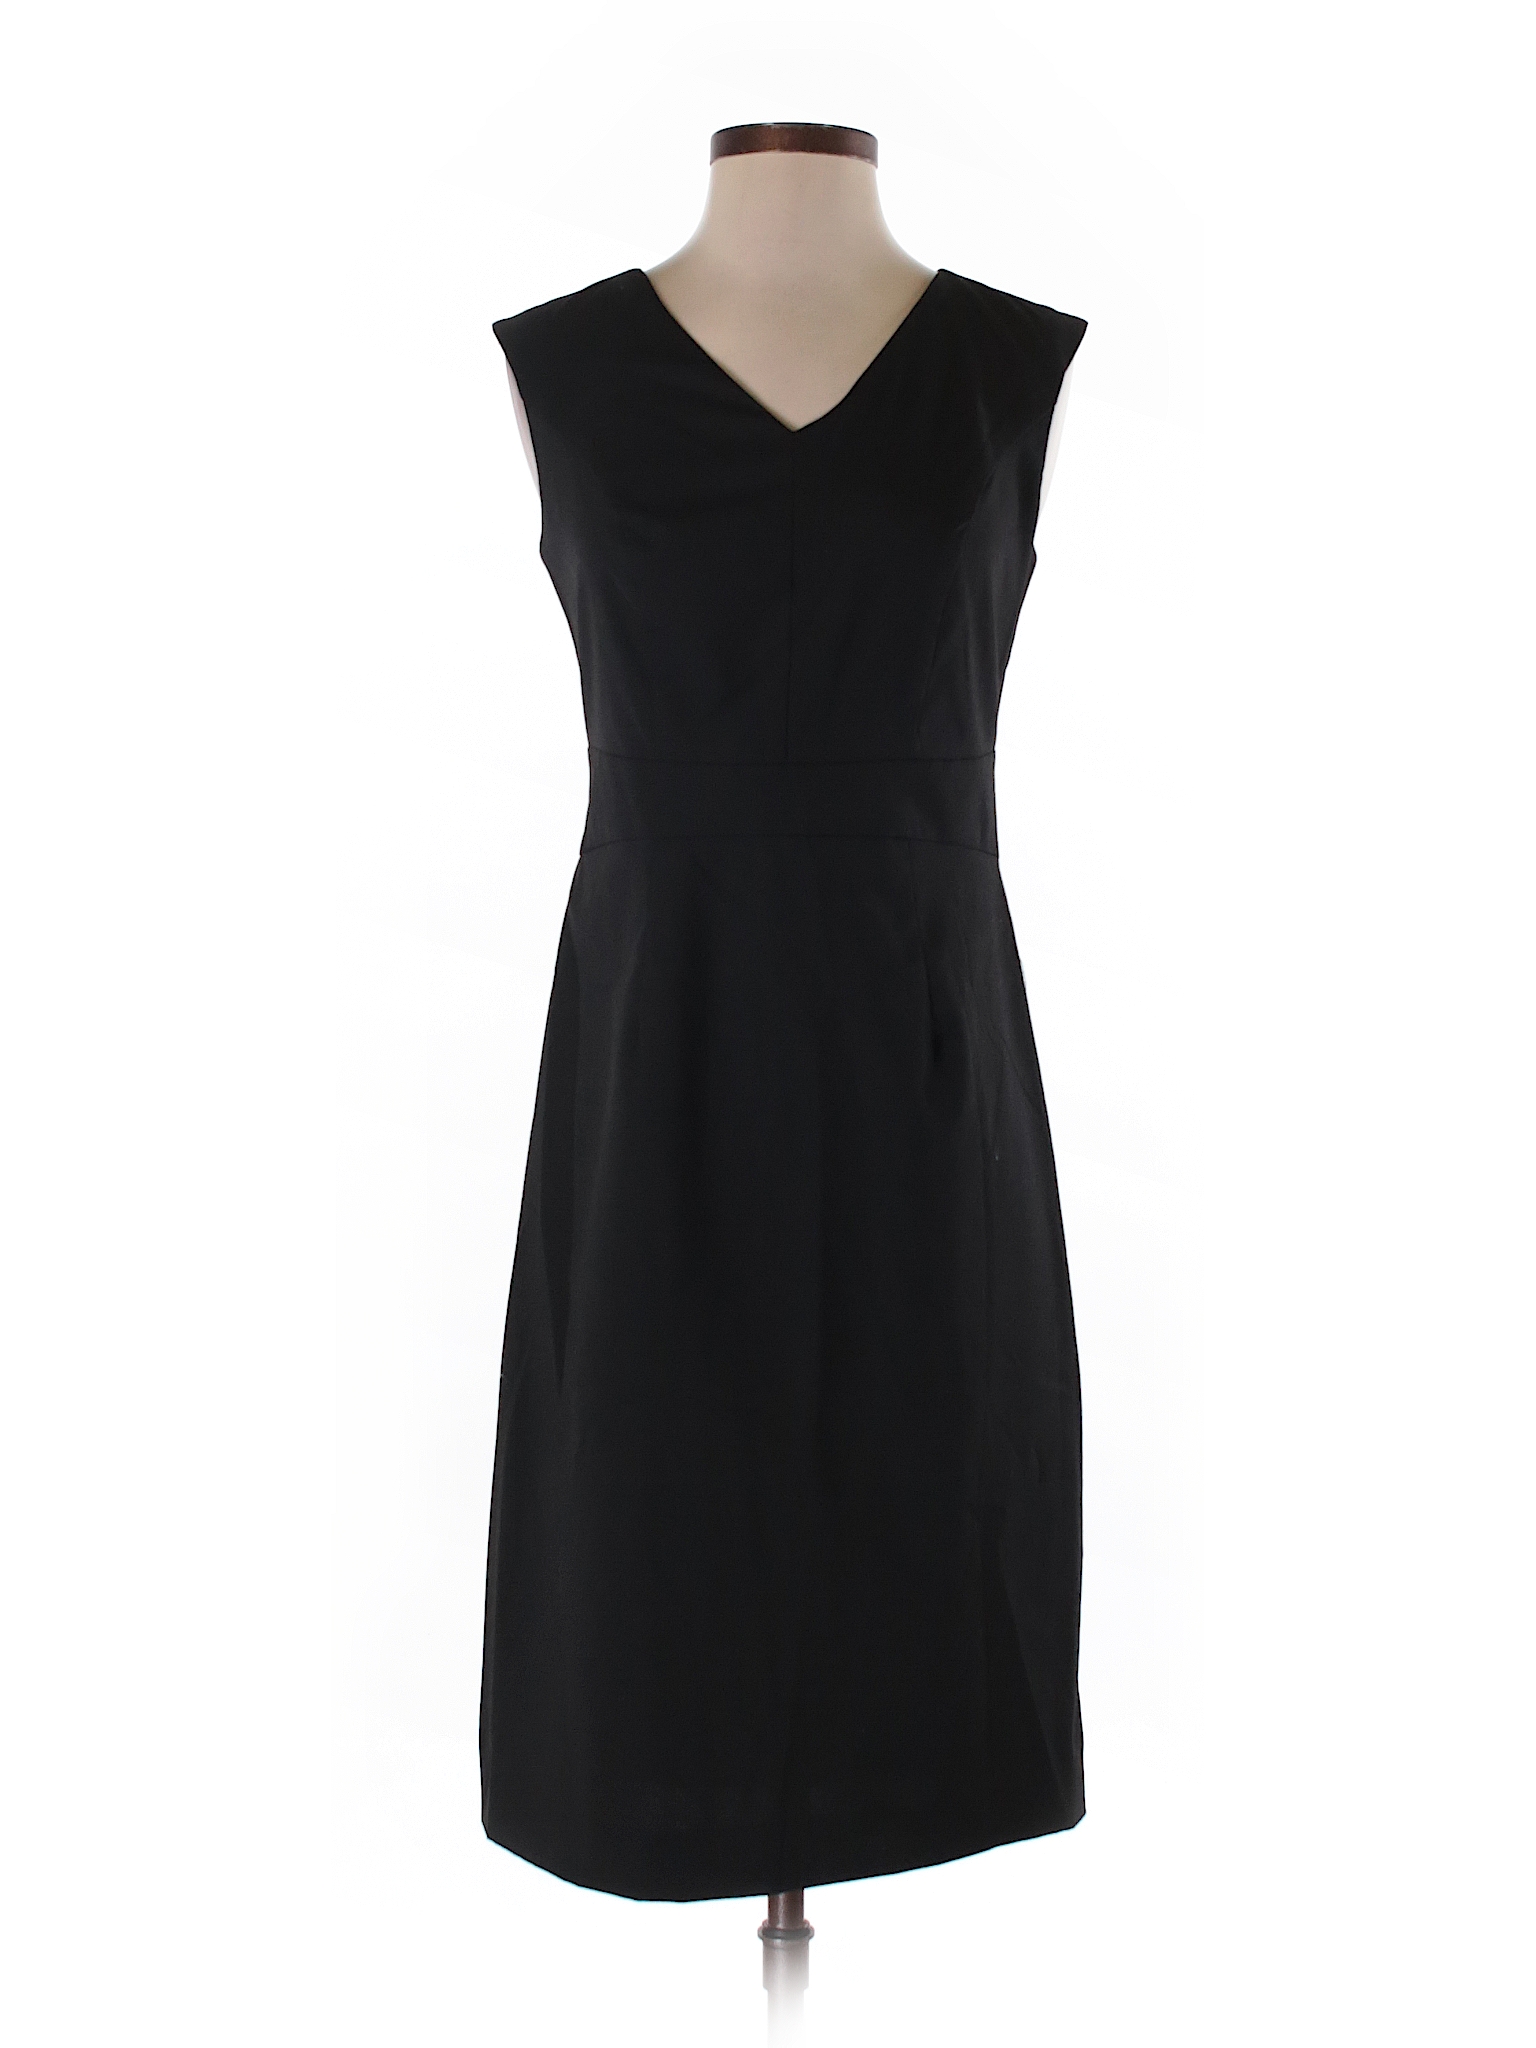 Mossimo Solid Black Casual Dress Size 4 - 66% off | thredUP